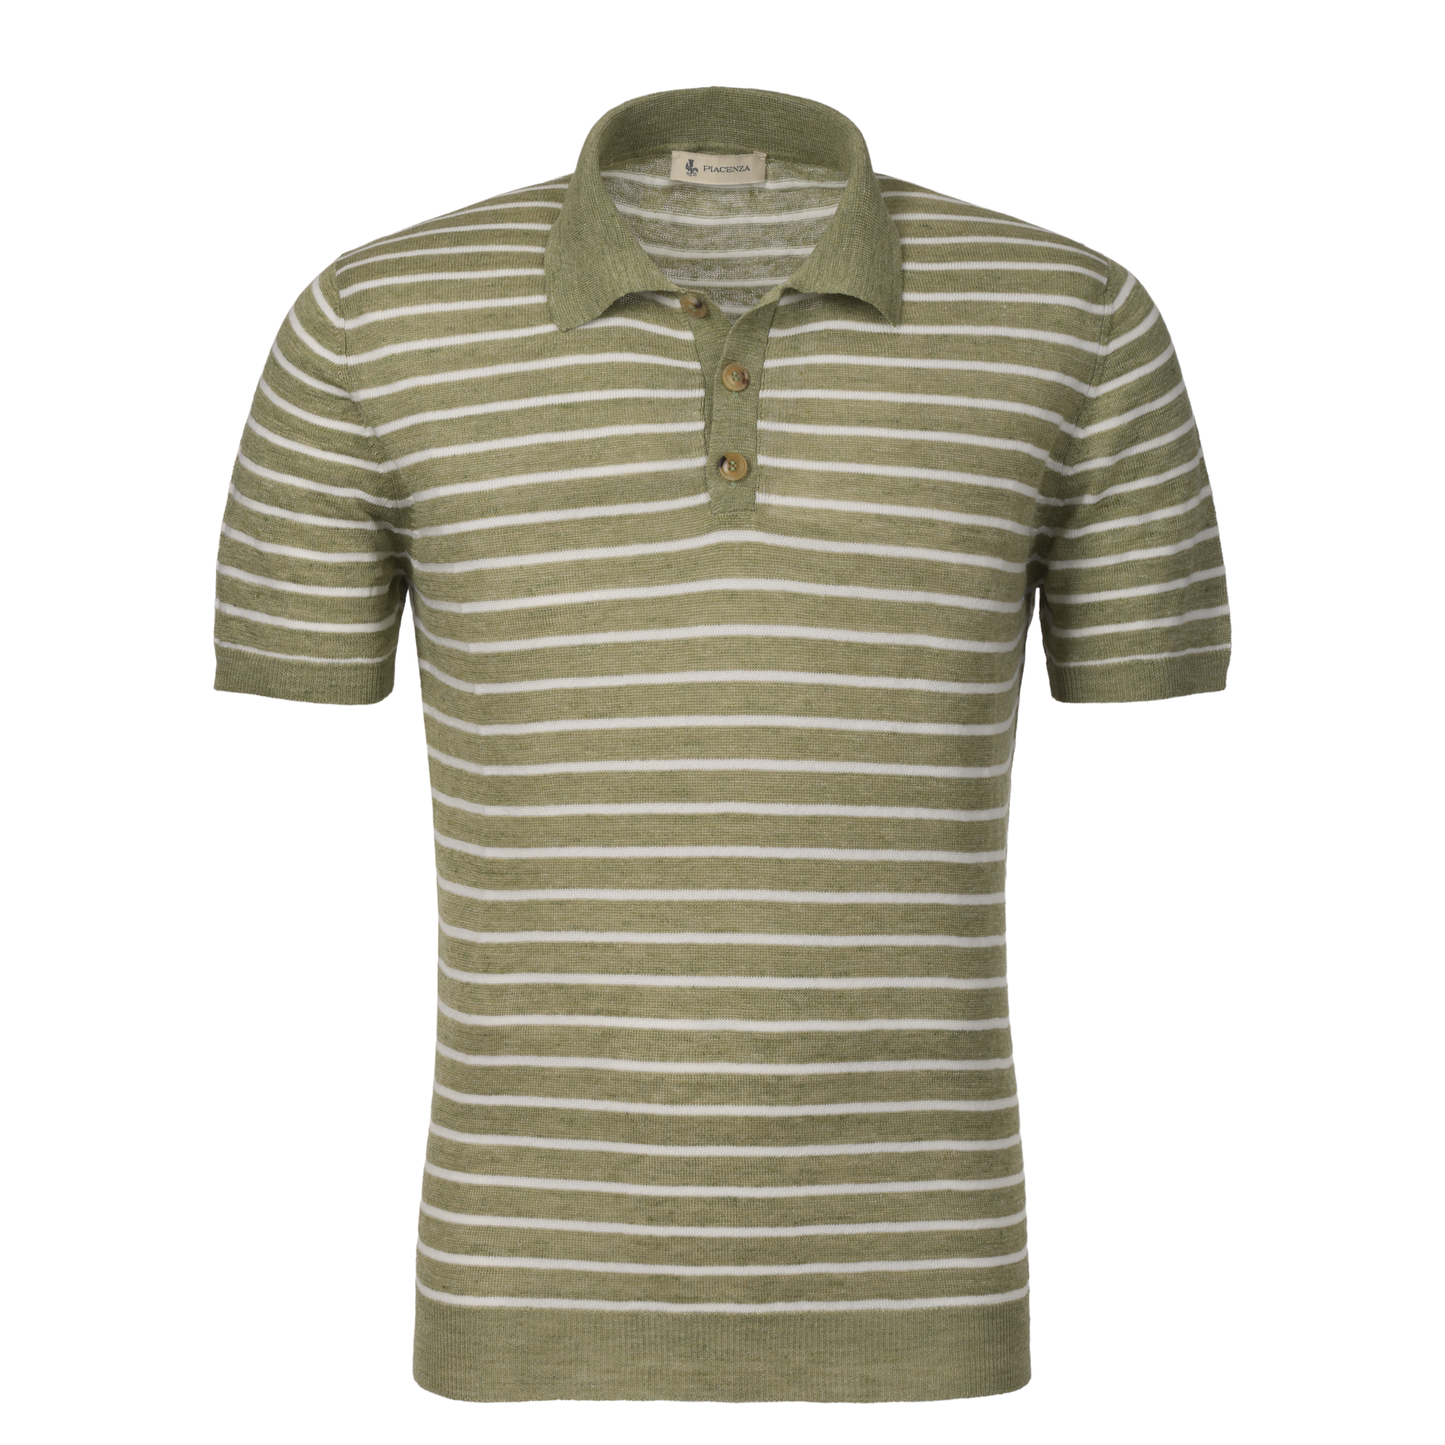 Striped Cotton-Blend Polo Shirt in Olive Green and White